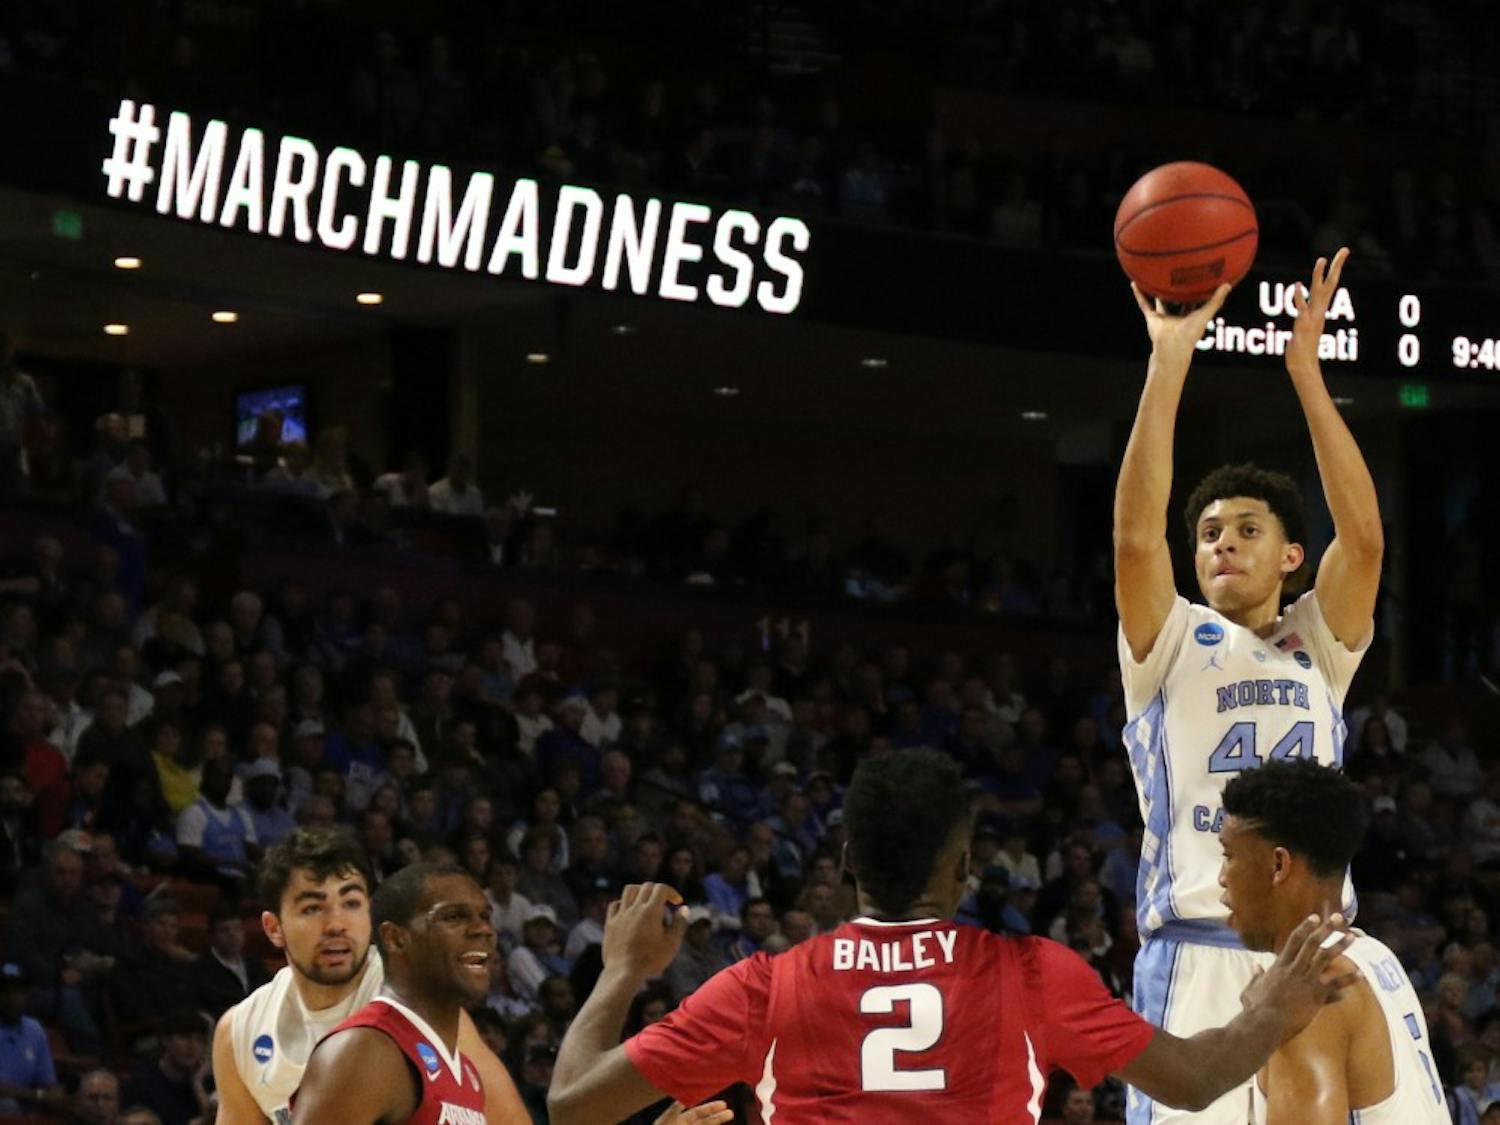 The North Carolina men's basketball team escaped a near upset by Arkansas, edging the Razorbacks 72-65 in the second round of the NCAA Tournament in Greenville on Sunday. The Tar Heels will play Butler on Friday in the Sweet 16 in Memphis.